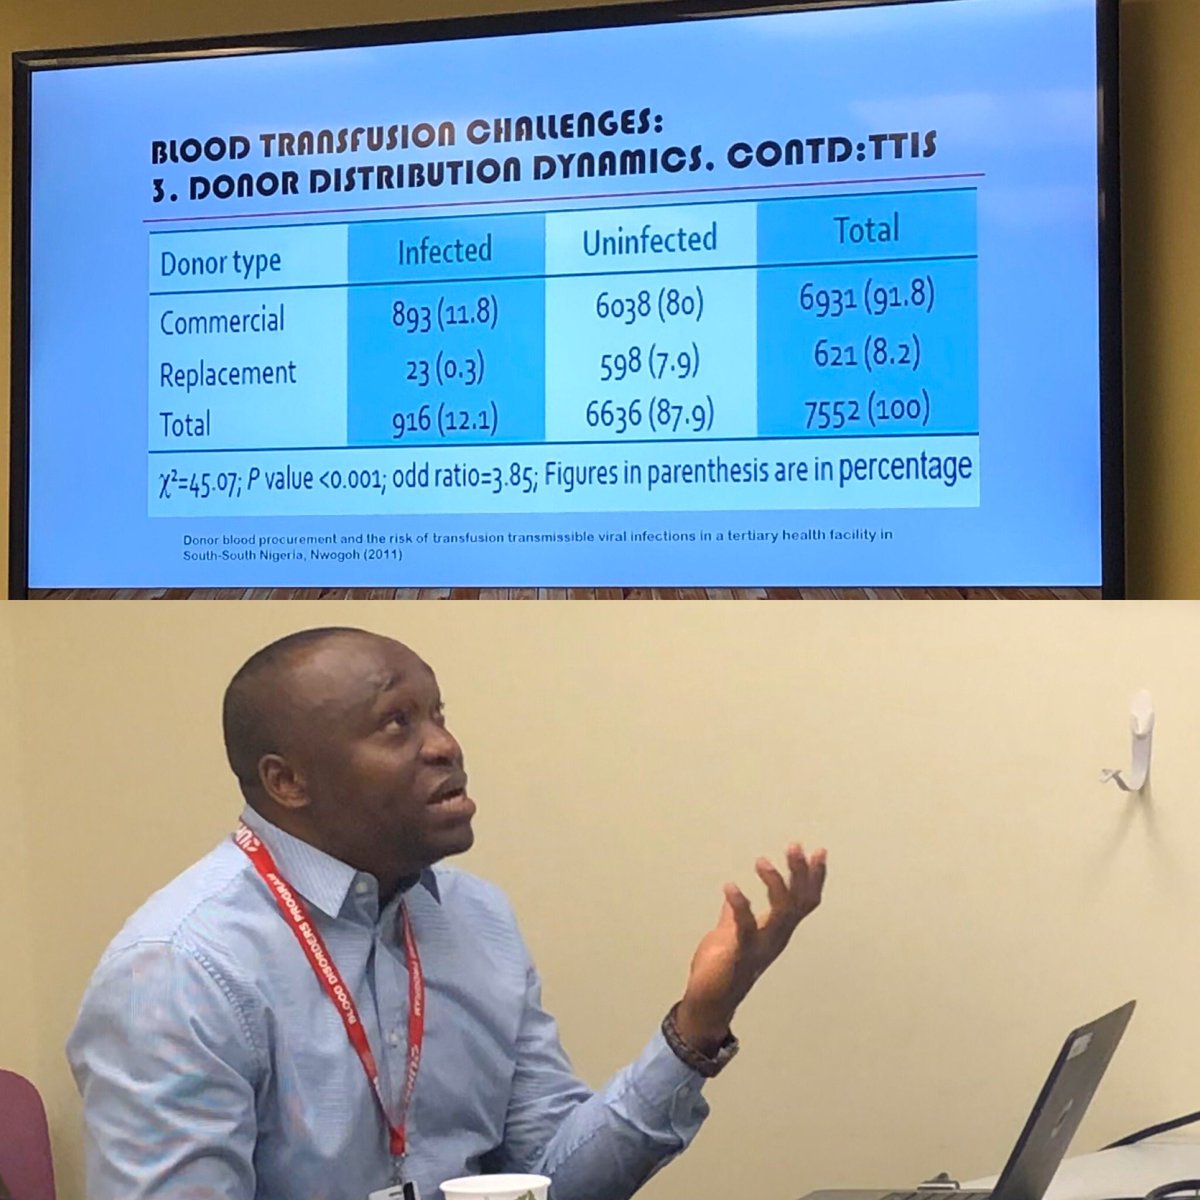 Dr. John Aneke, a hematologist completing his specialized training in hemoglobinopathy here in Toronto, presenting on the challenges of providing transfusion support for sickle cell patients in his home country of Nigeria